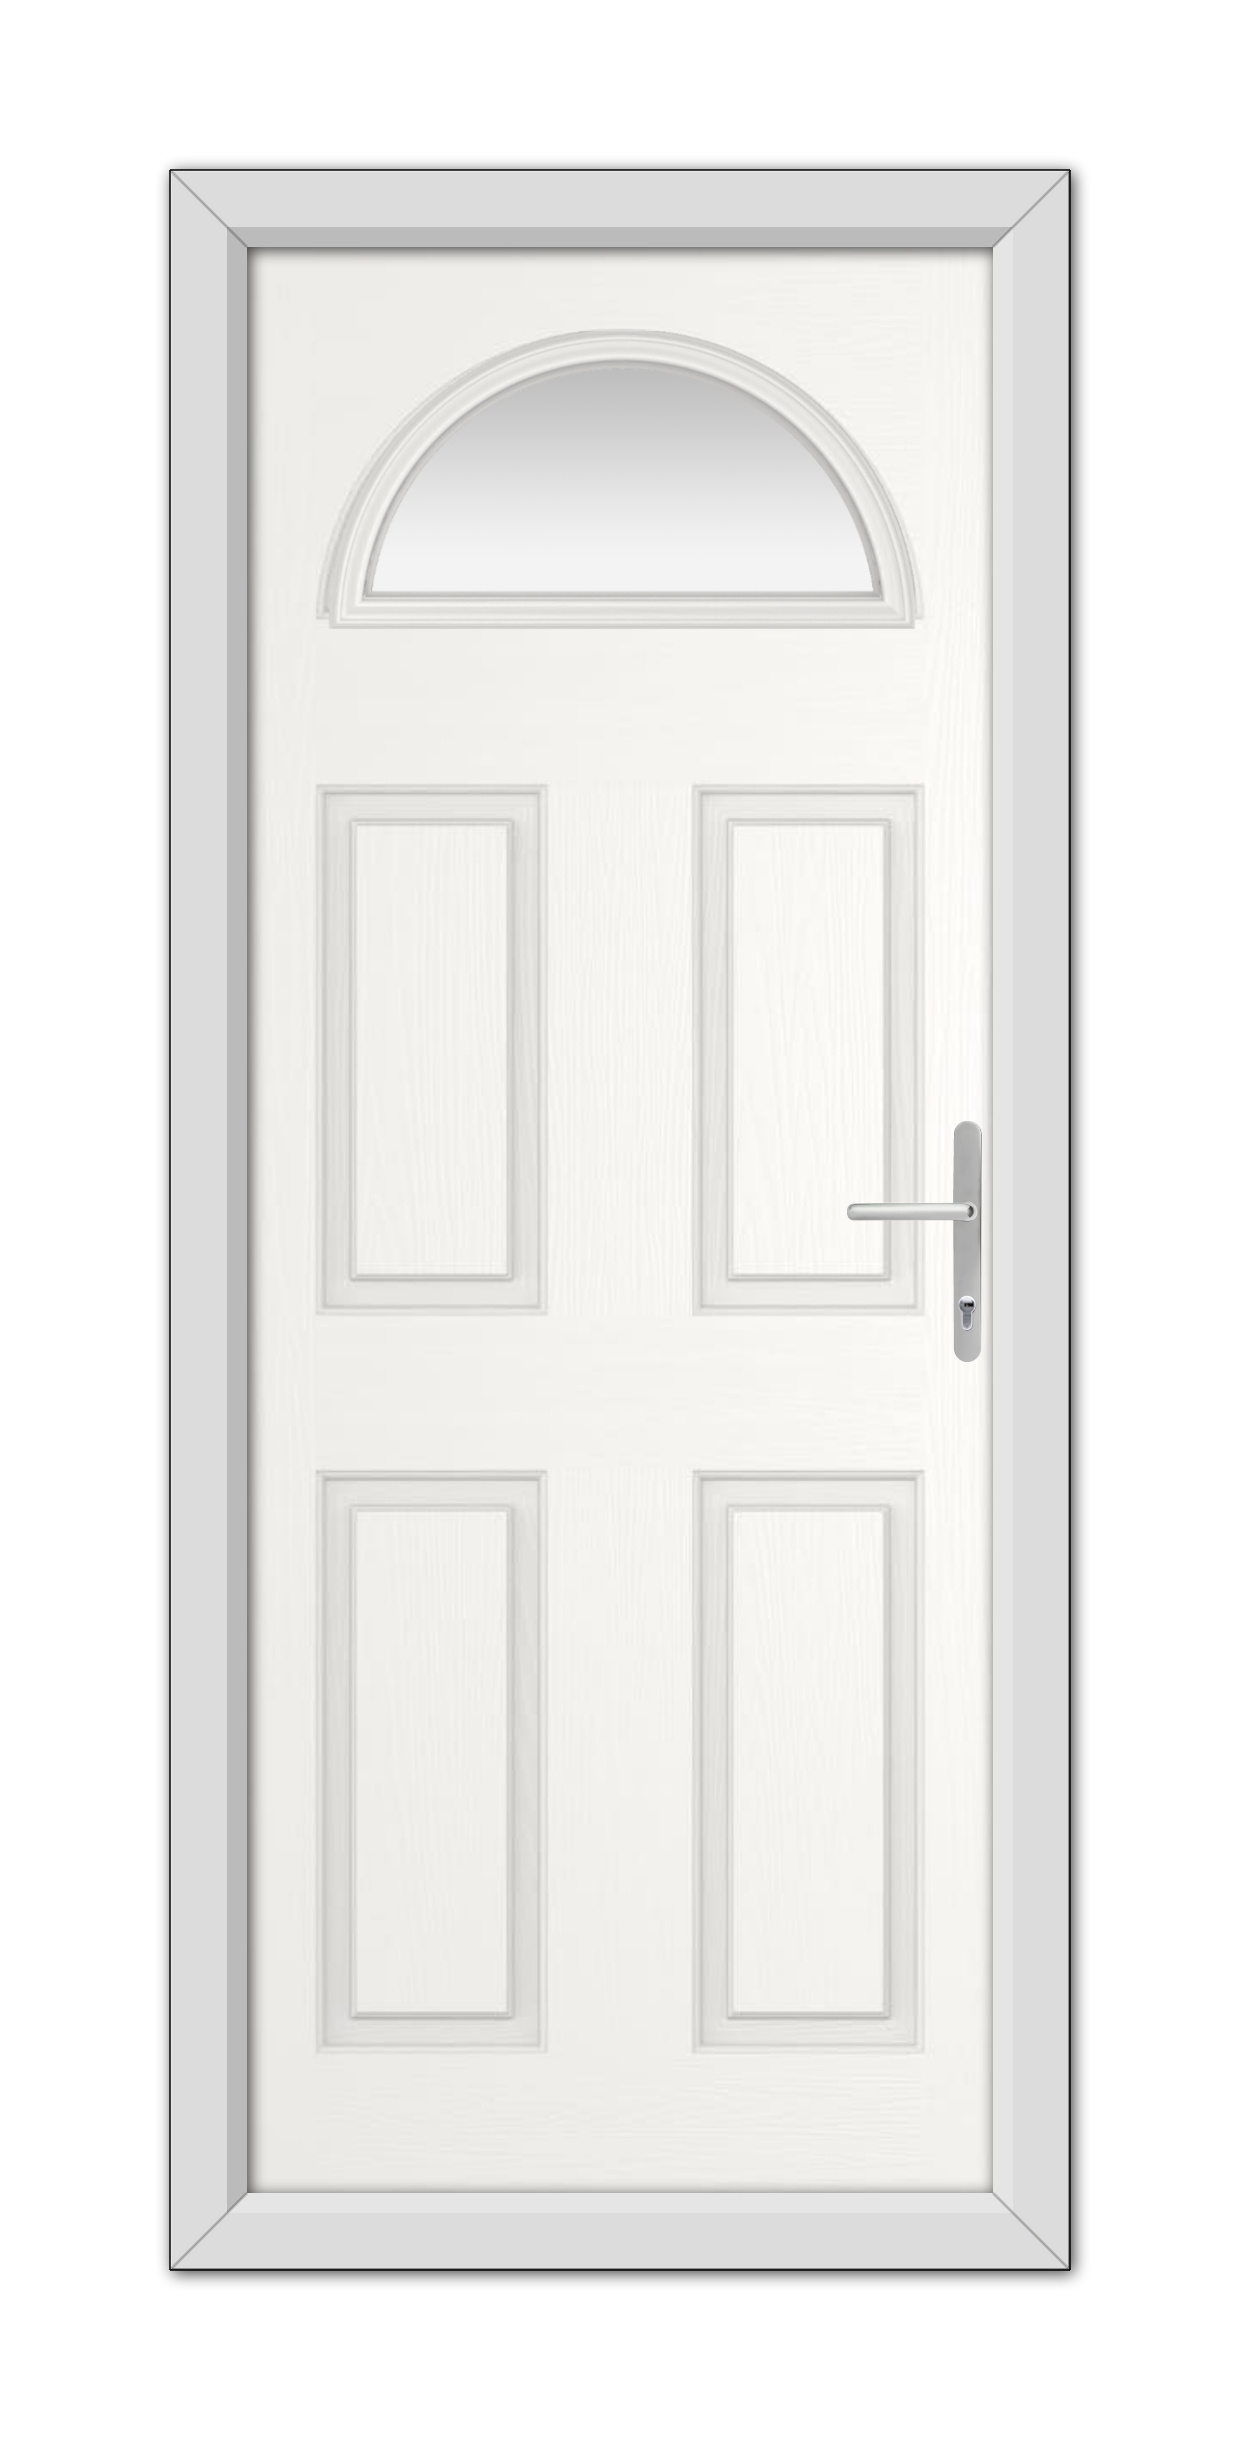 White Winslow 1 Composite Door 48mm Timber Core with a semi-circle window at the top and a metallic handle, set in a plain frame, isolated on a white background.